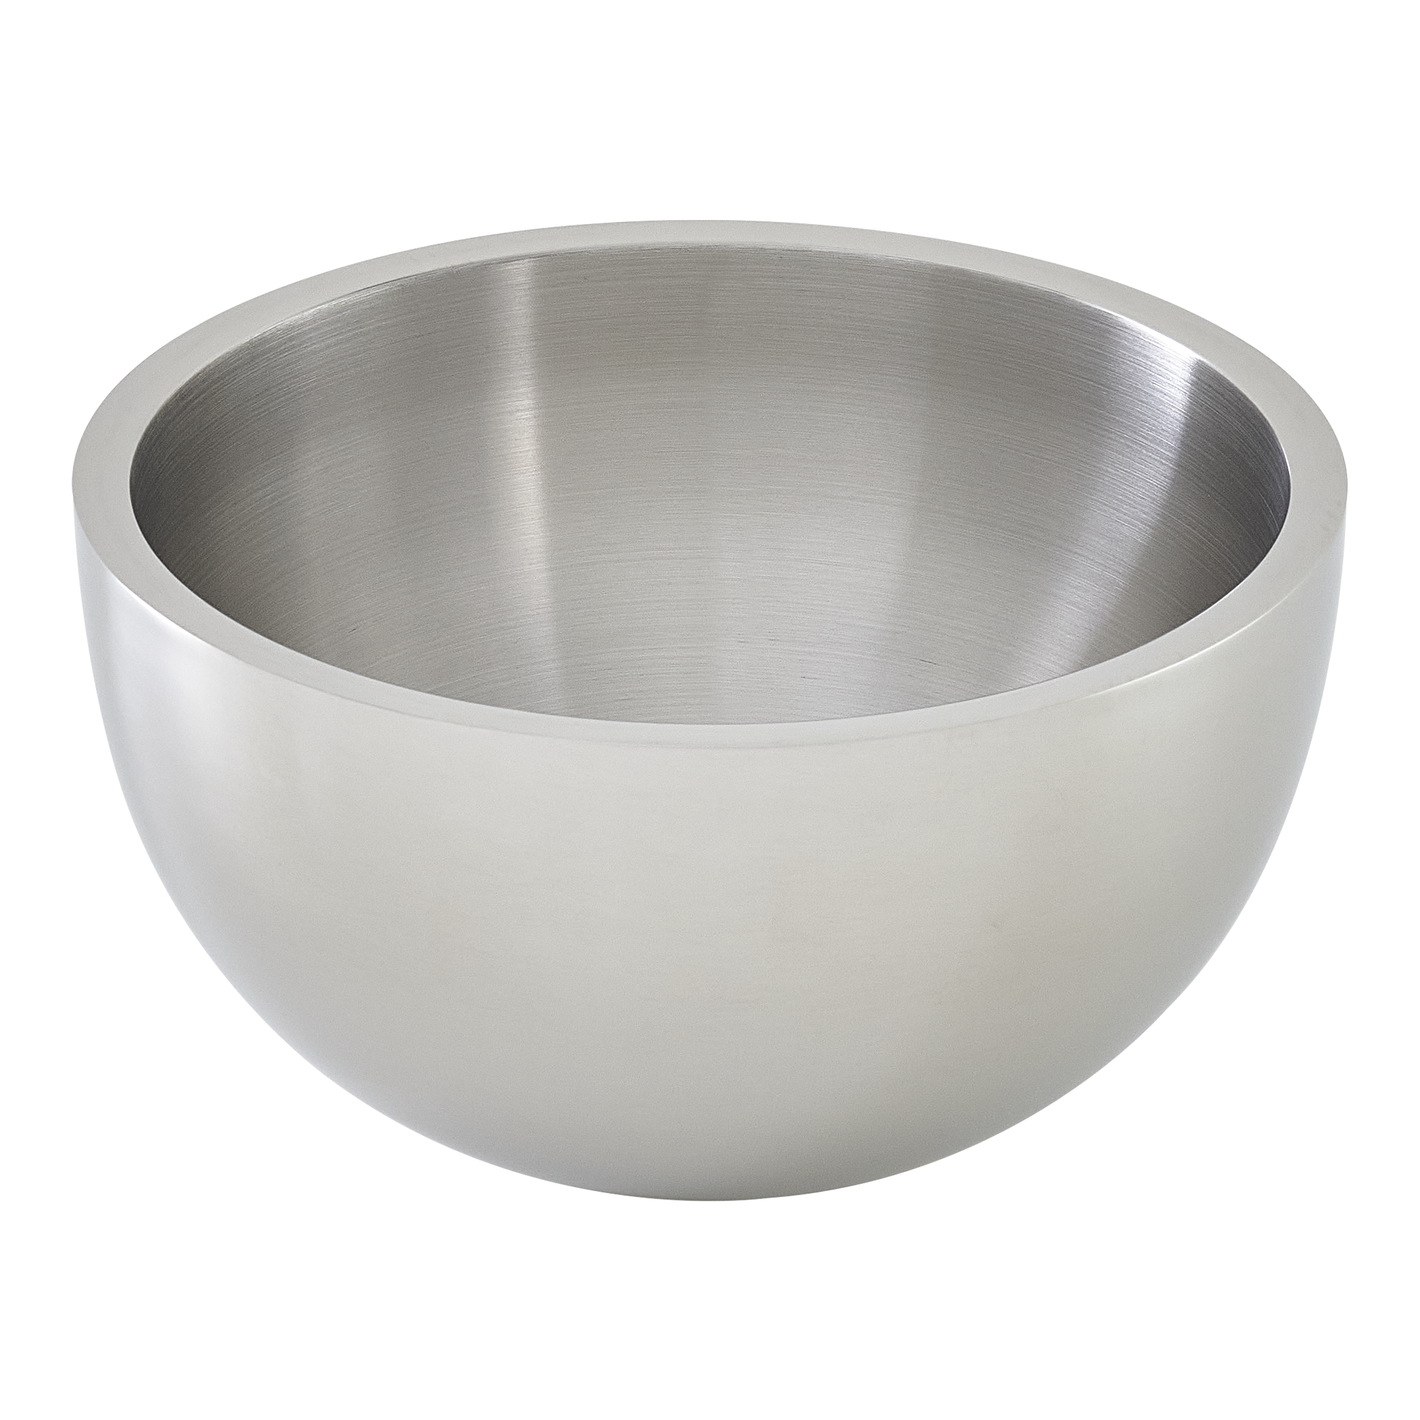 Lifetime Cookware Double-Walled Bowl